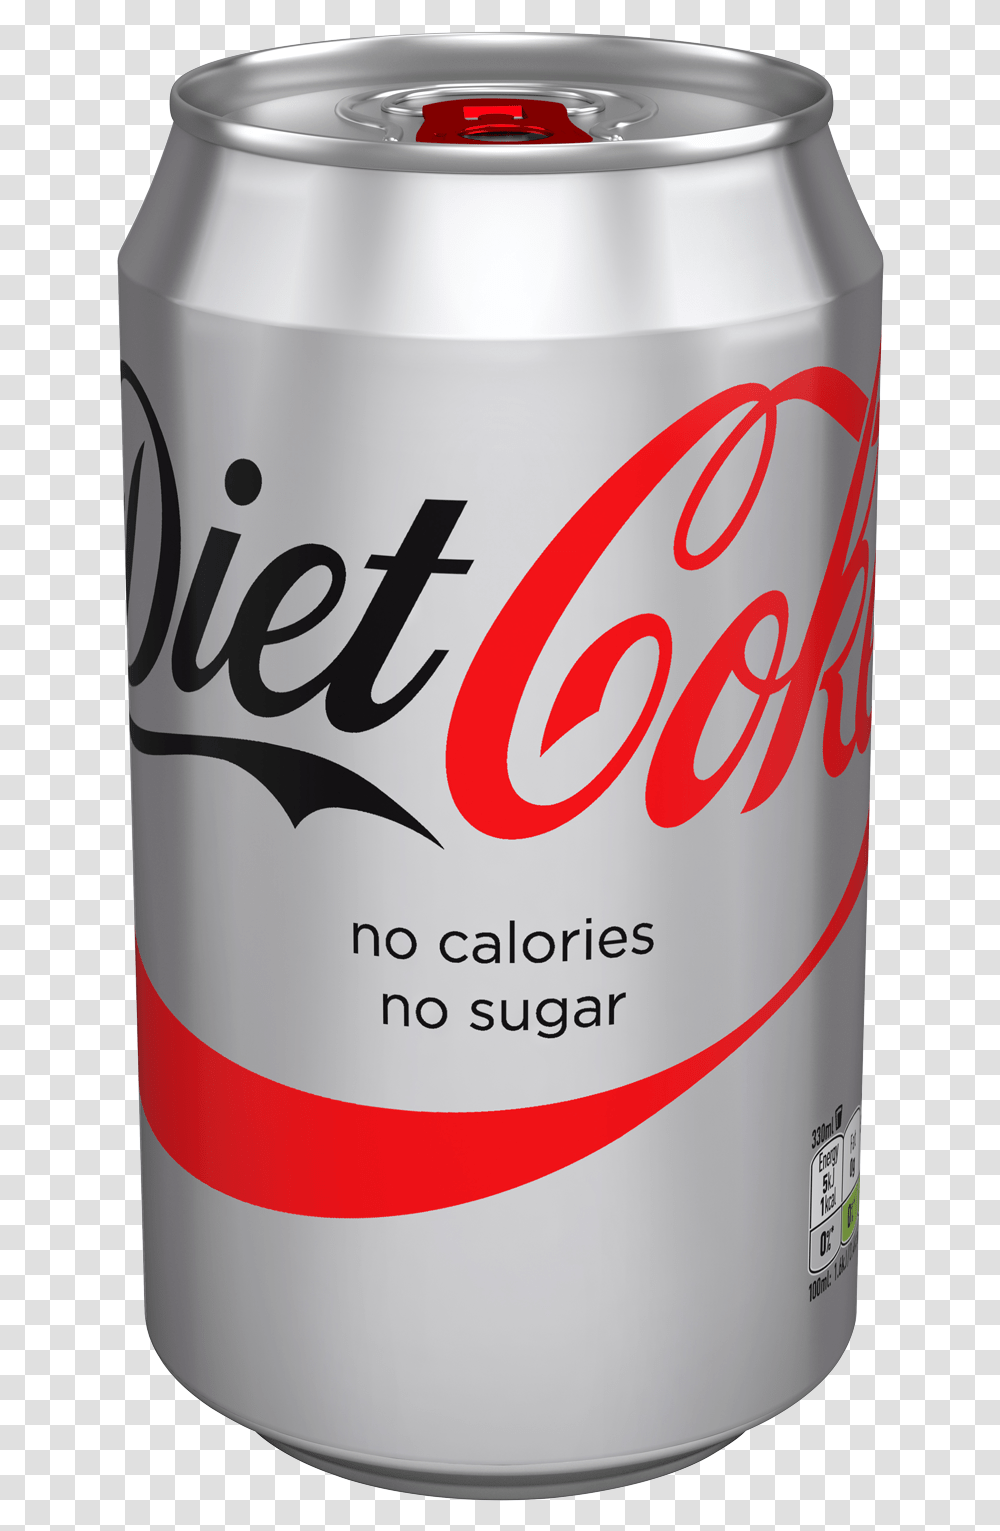 Diet Coke Can 24 X 330ml Diet Coke Can Uk Full Size Diet Coke Twisted Strawberry, Beverage, Drink, Soda, Coca Transparent Png